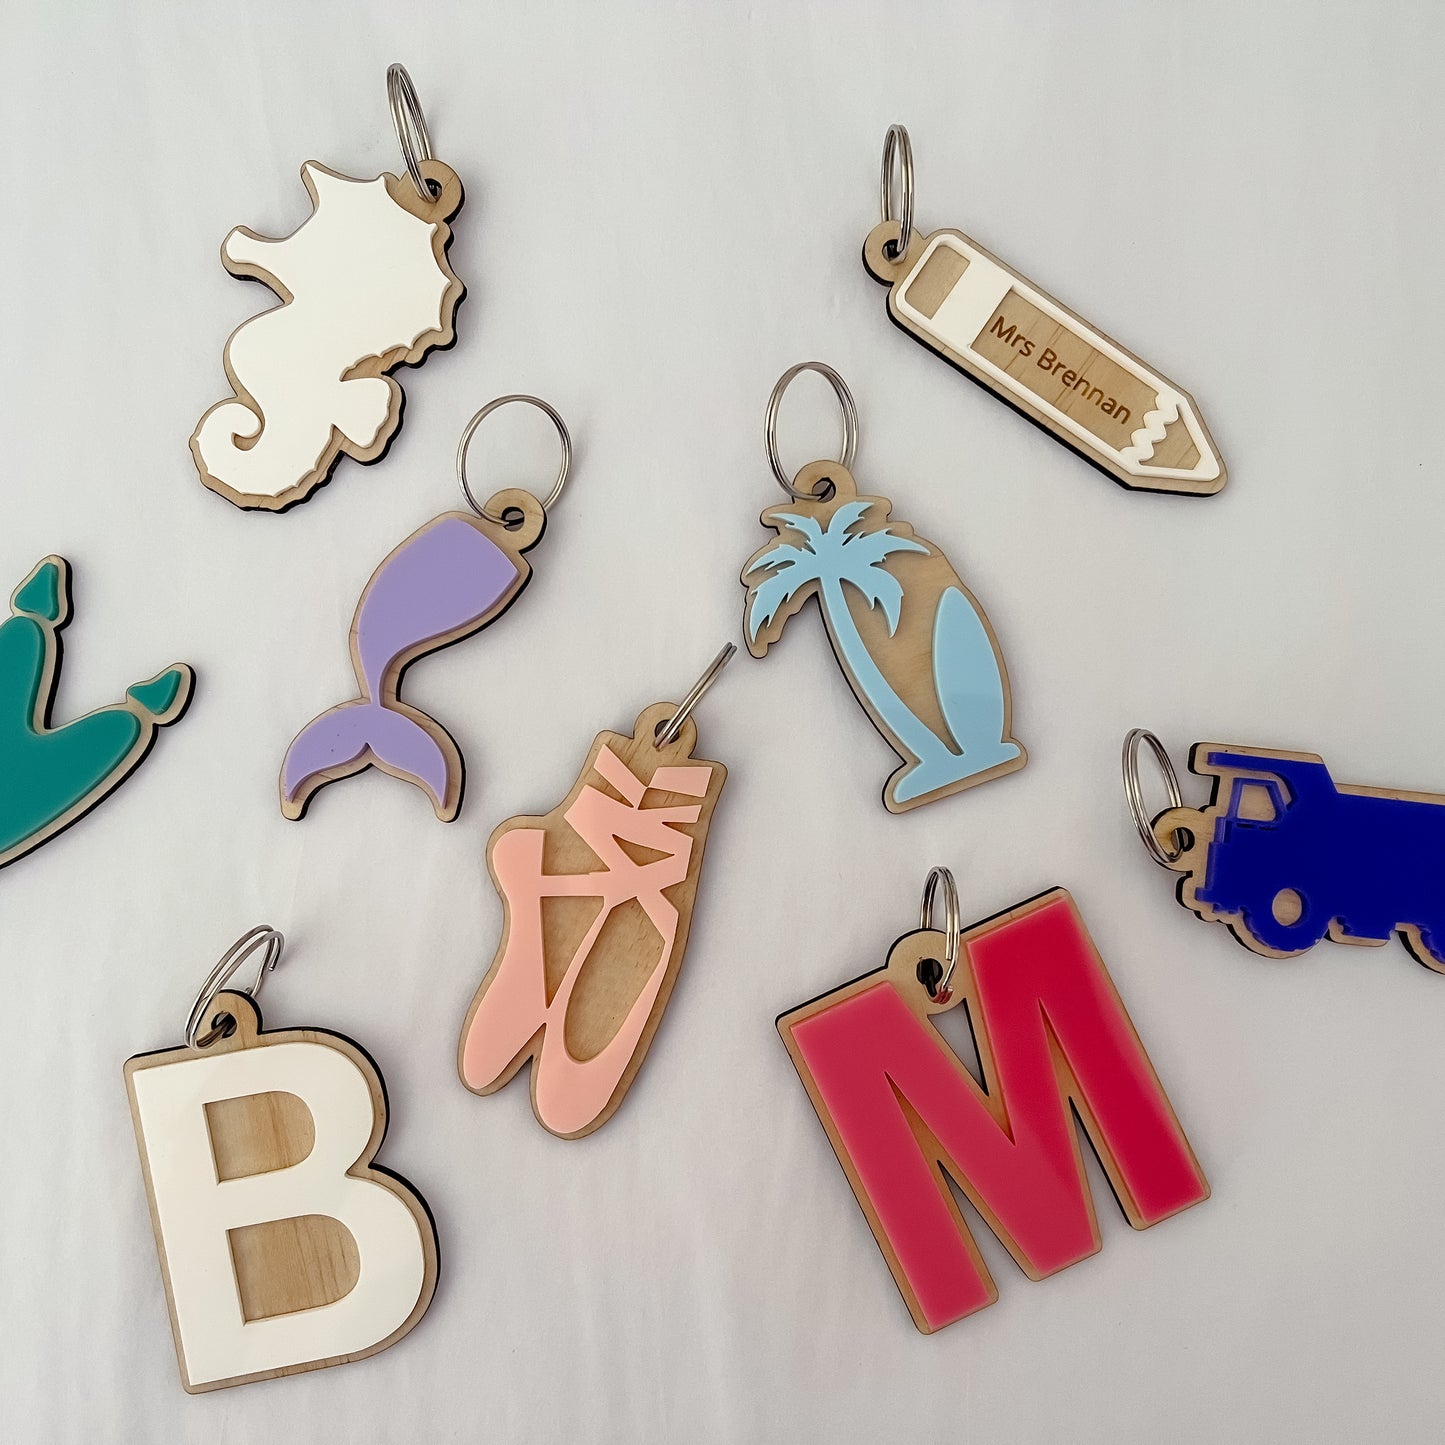 Bag Tags / Key Ring - Acrylic Letter